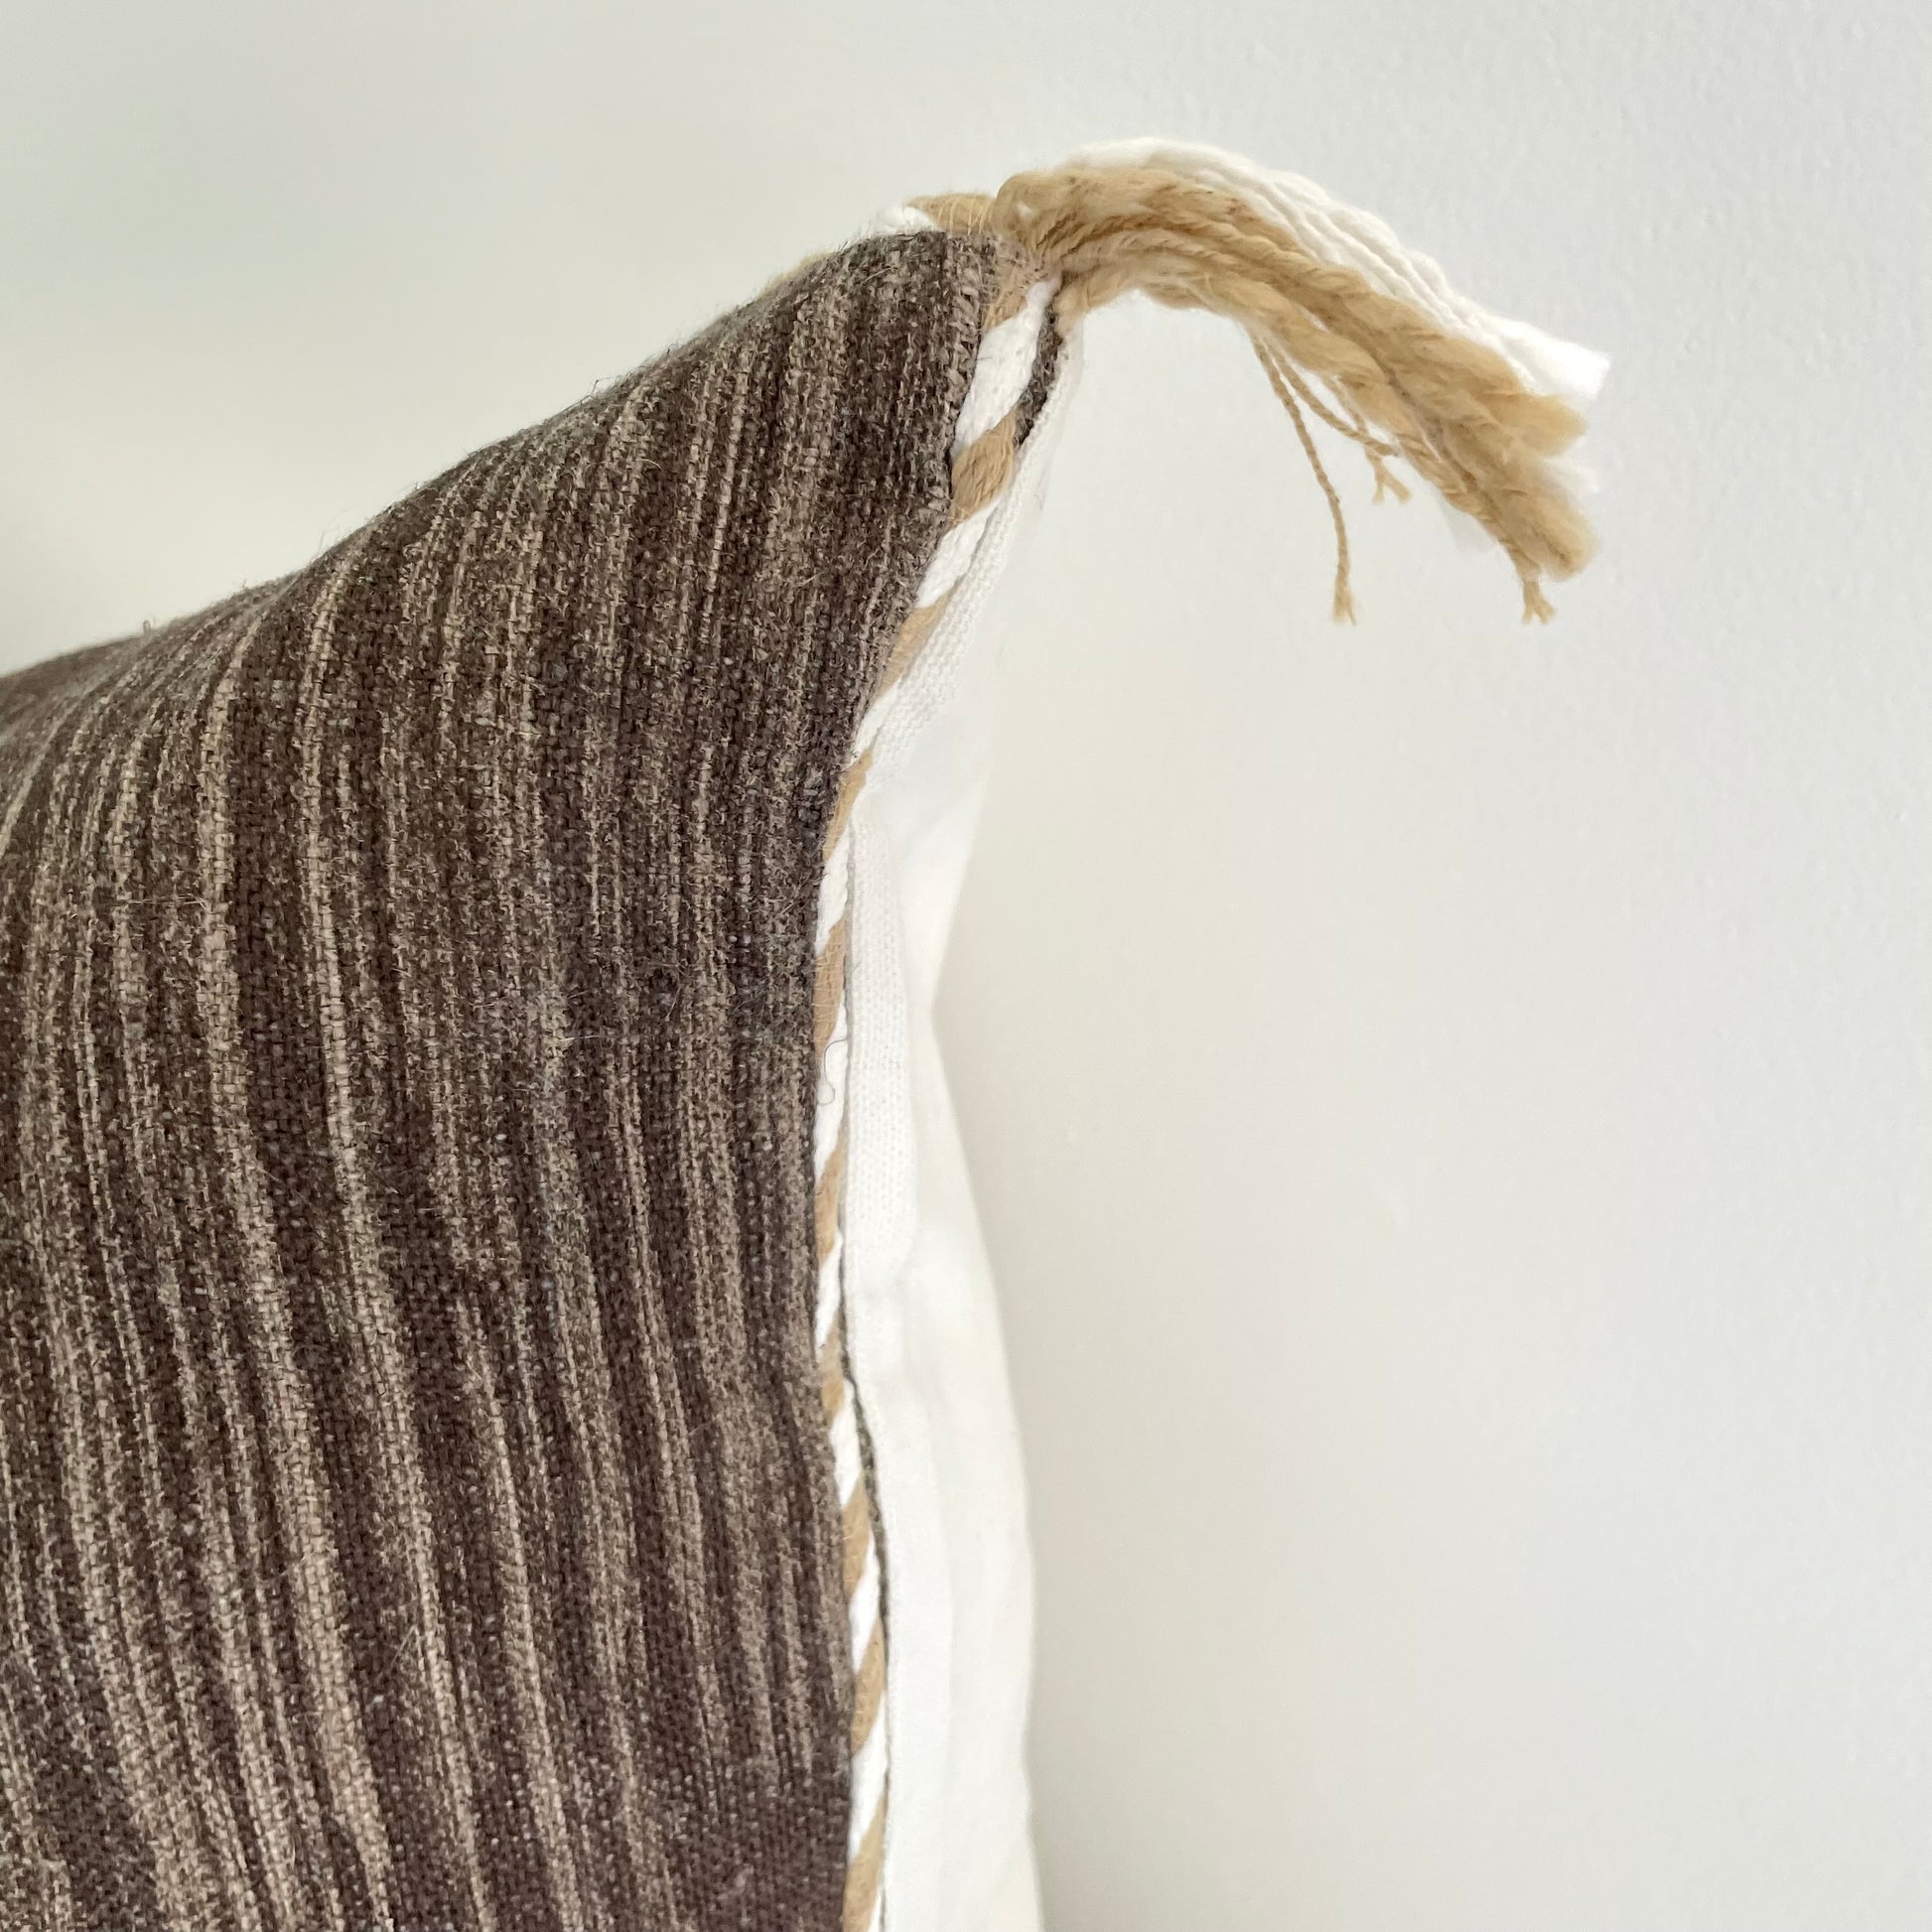 chocolate brown linen 18x18 square pillow cover with striped edging and tassels